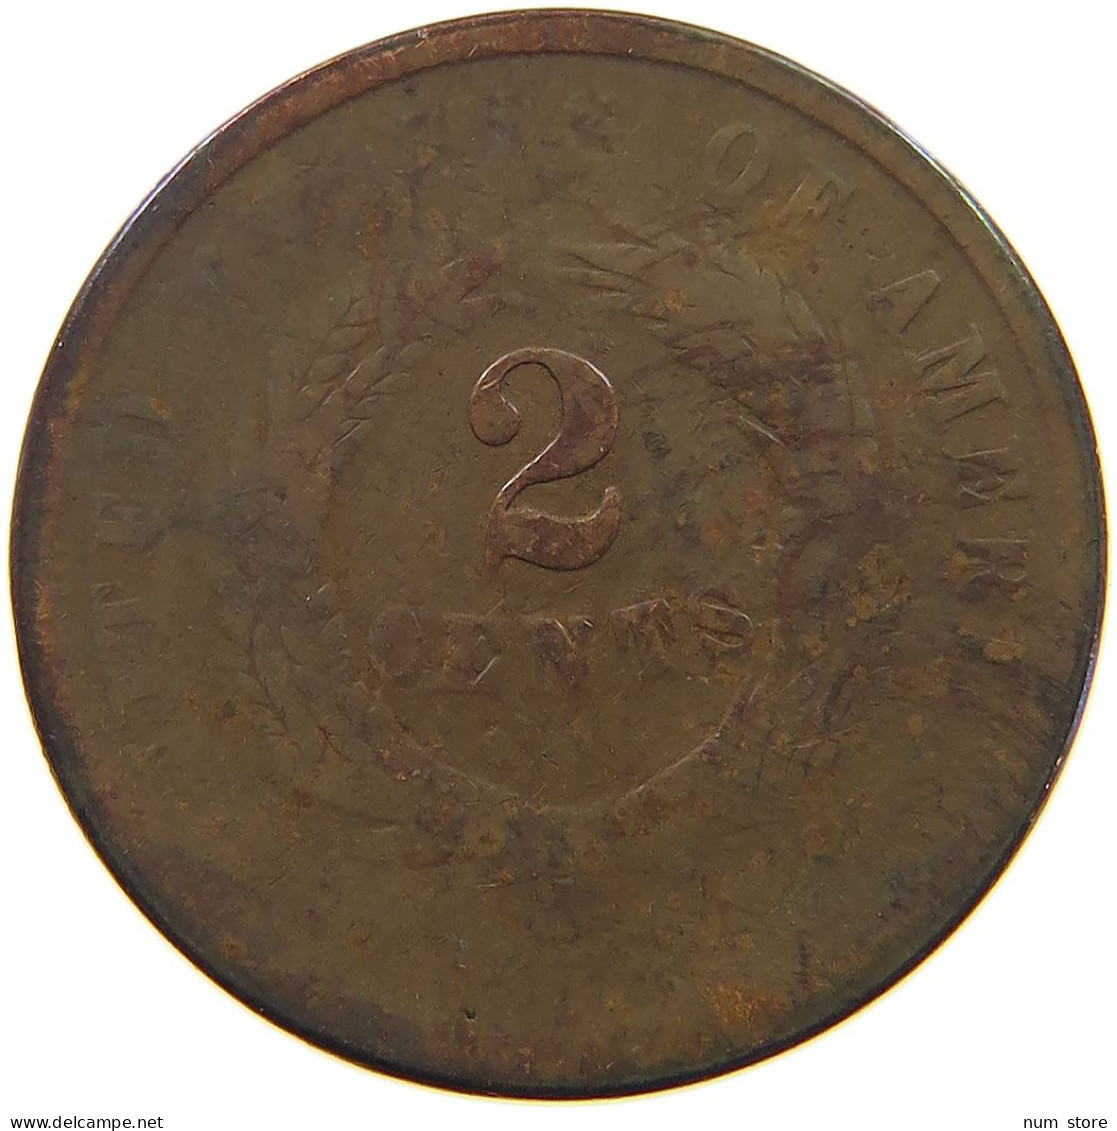 UNITED STATES OF AMERICA 2 CENTS 1864  #c079 0131 - 2, 3 & 20 Cents